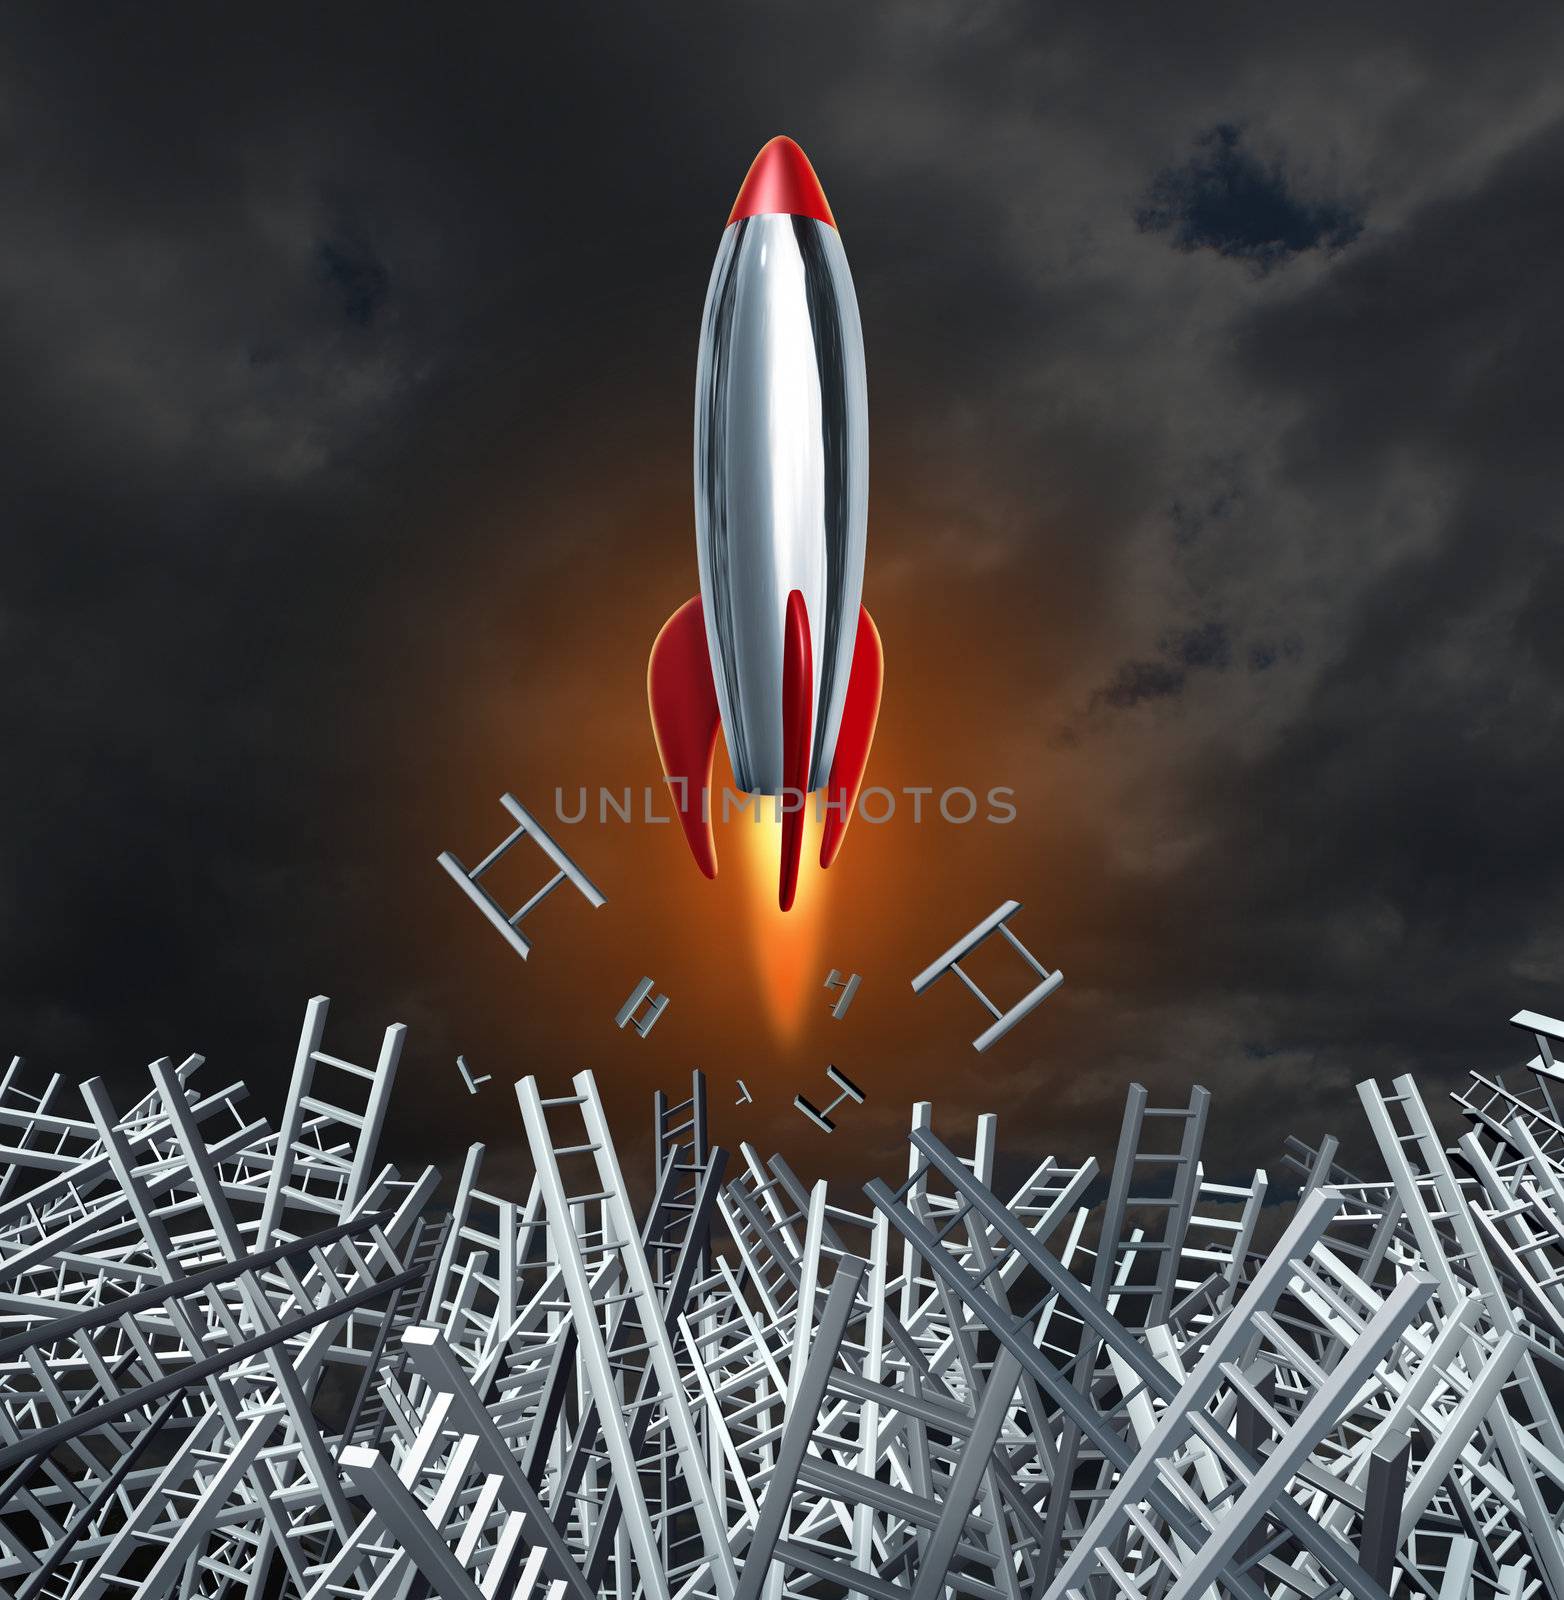 Unstoppable determination and breaking down ladder obstacles and getting past confusion with a red hot rocket to achieve your personal and business goals.